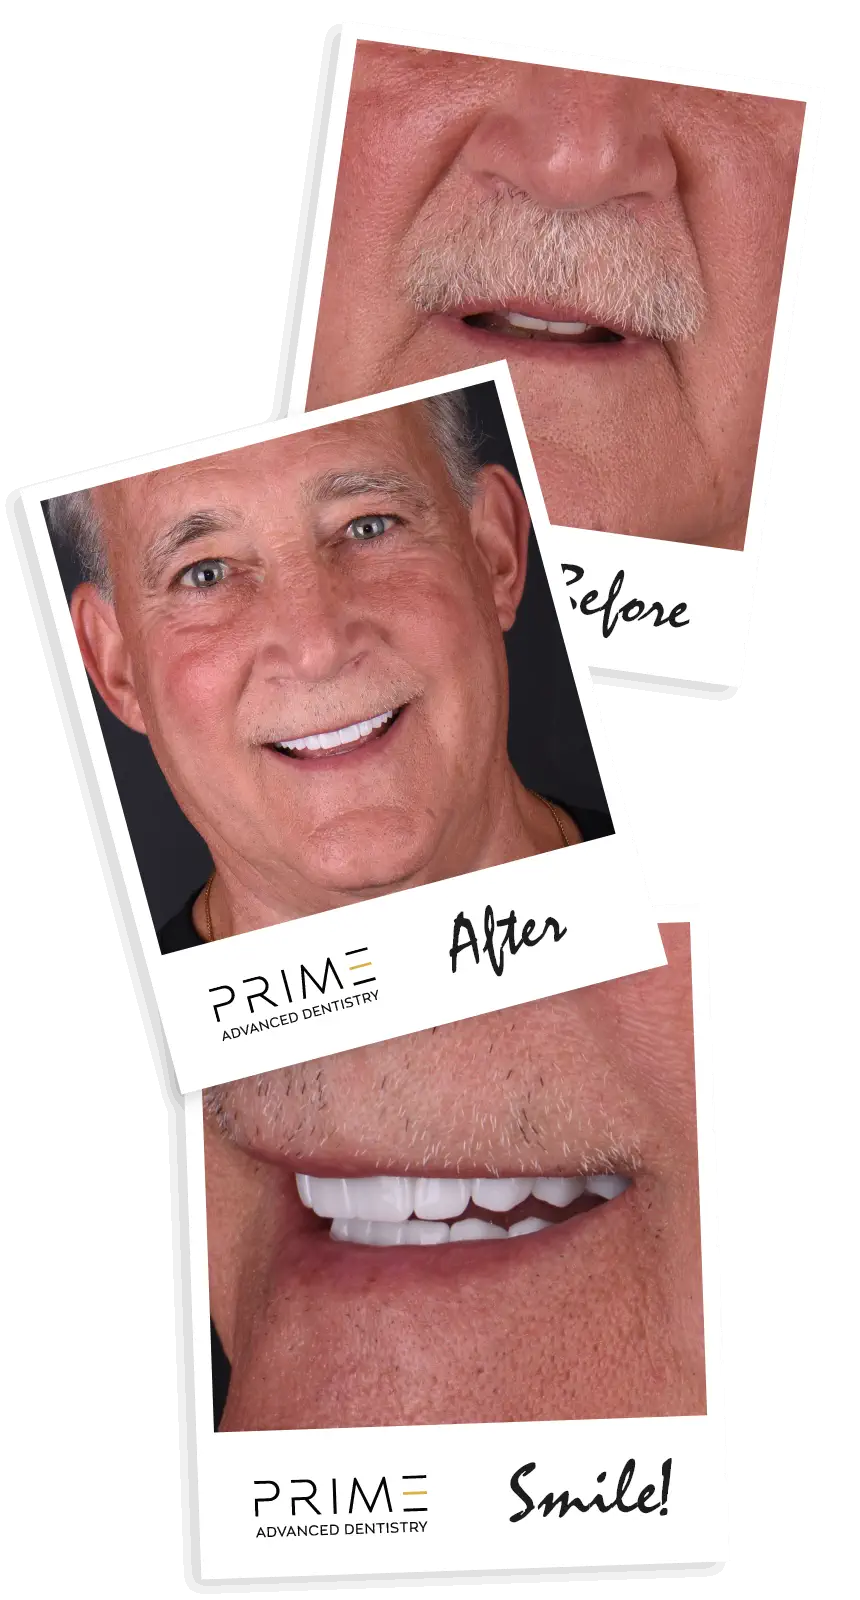 Smile Gallery Prime Advanced Dentistry: Image gallery showcasing smiles transformed at Prime Advanced Dentistry